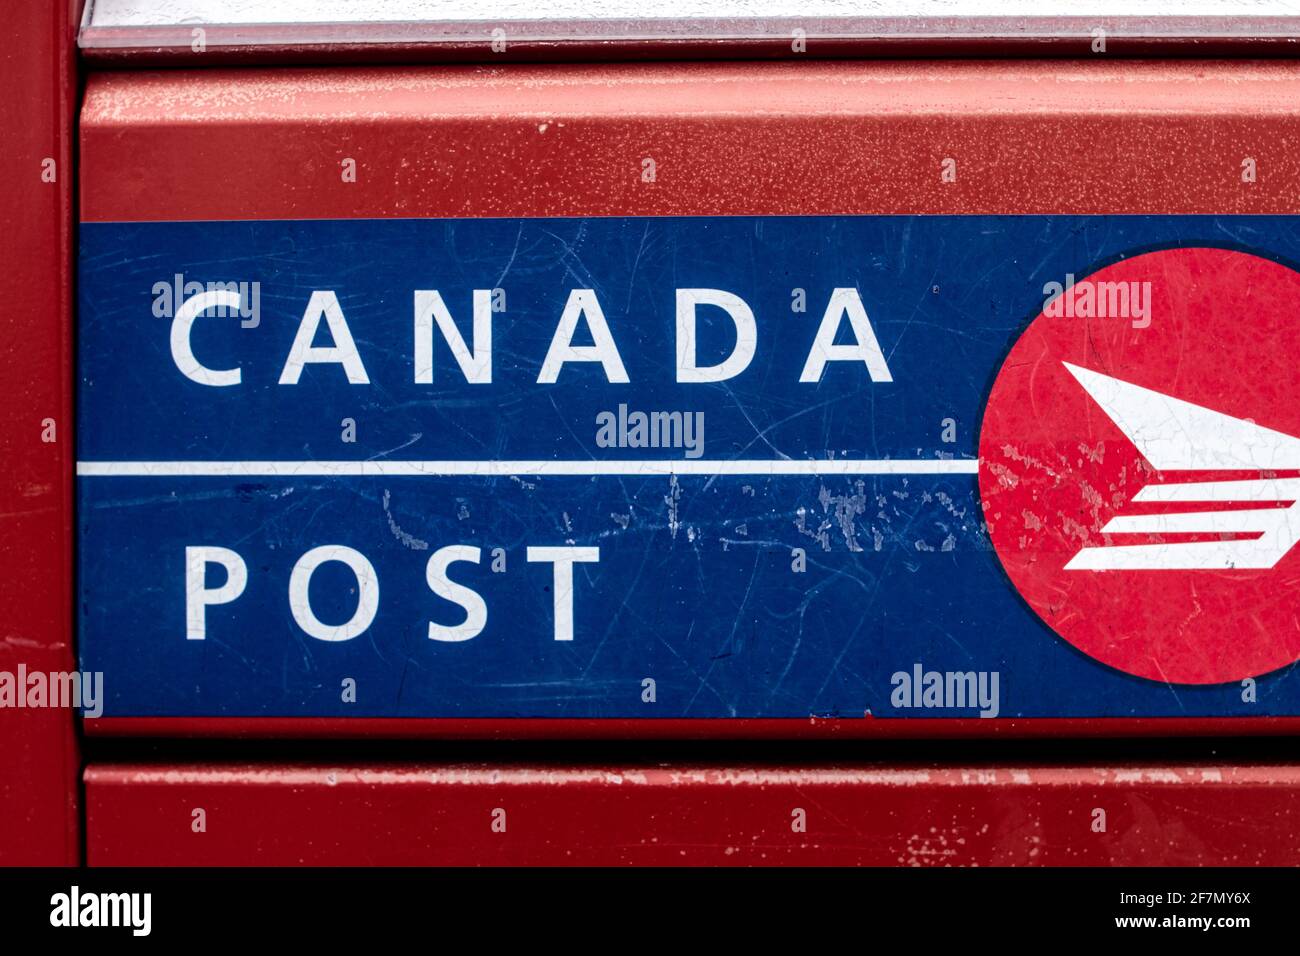 London, Ontario, Canada - February 15 2021: Red, blue and white Canada post metal letterbox, crisp shot and closeup of the logo. Stock Photo